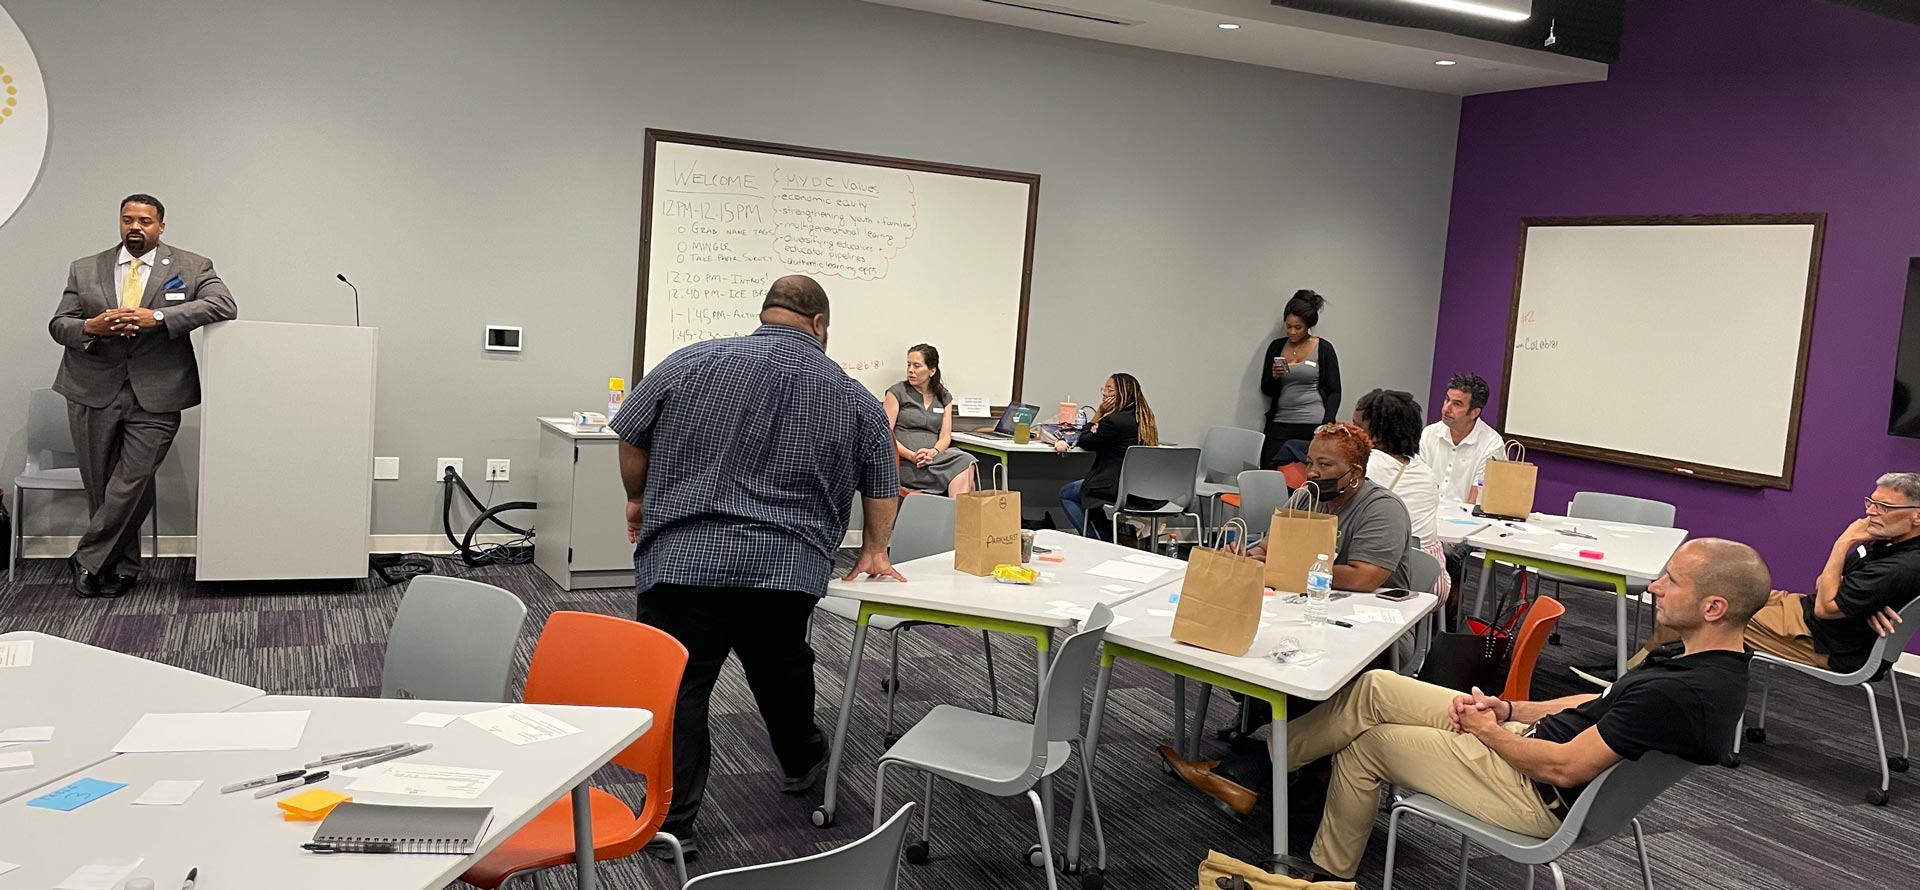 The Forbes Funds team conducts a human-centered design workshop with local Pittsburgh nonprofit MYDC, showing participants and Fred Brown and Olivia Benson next to a podium and large whiteboard